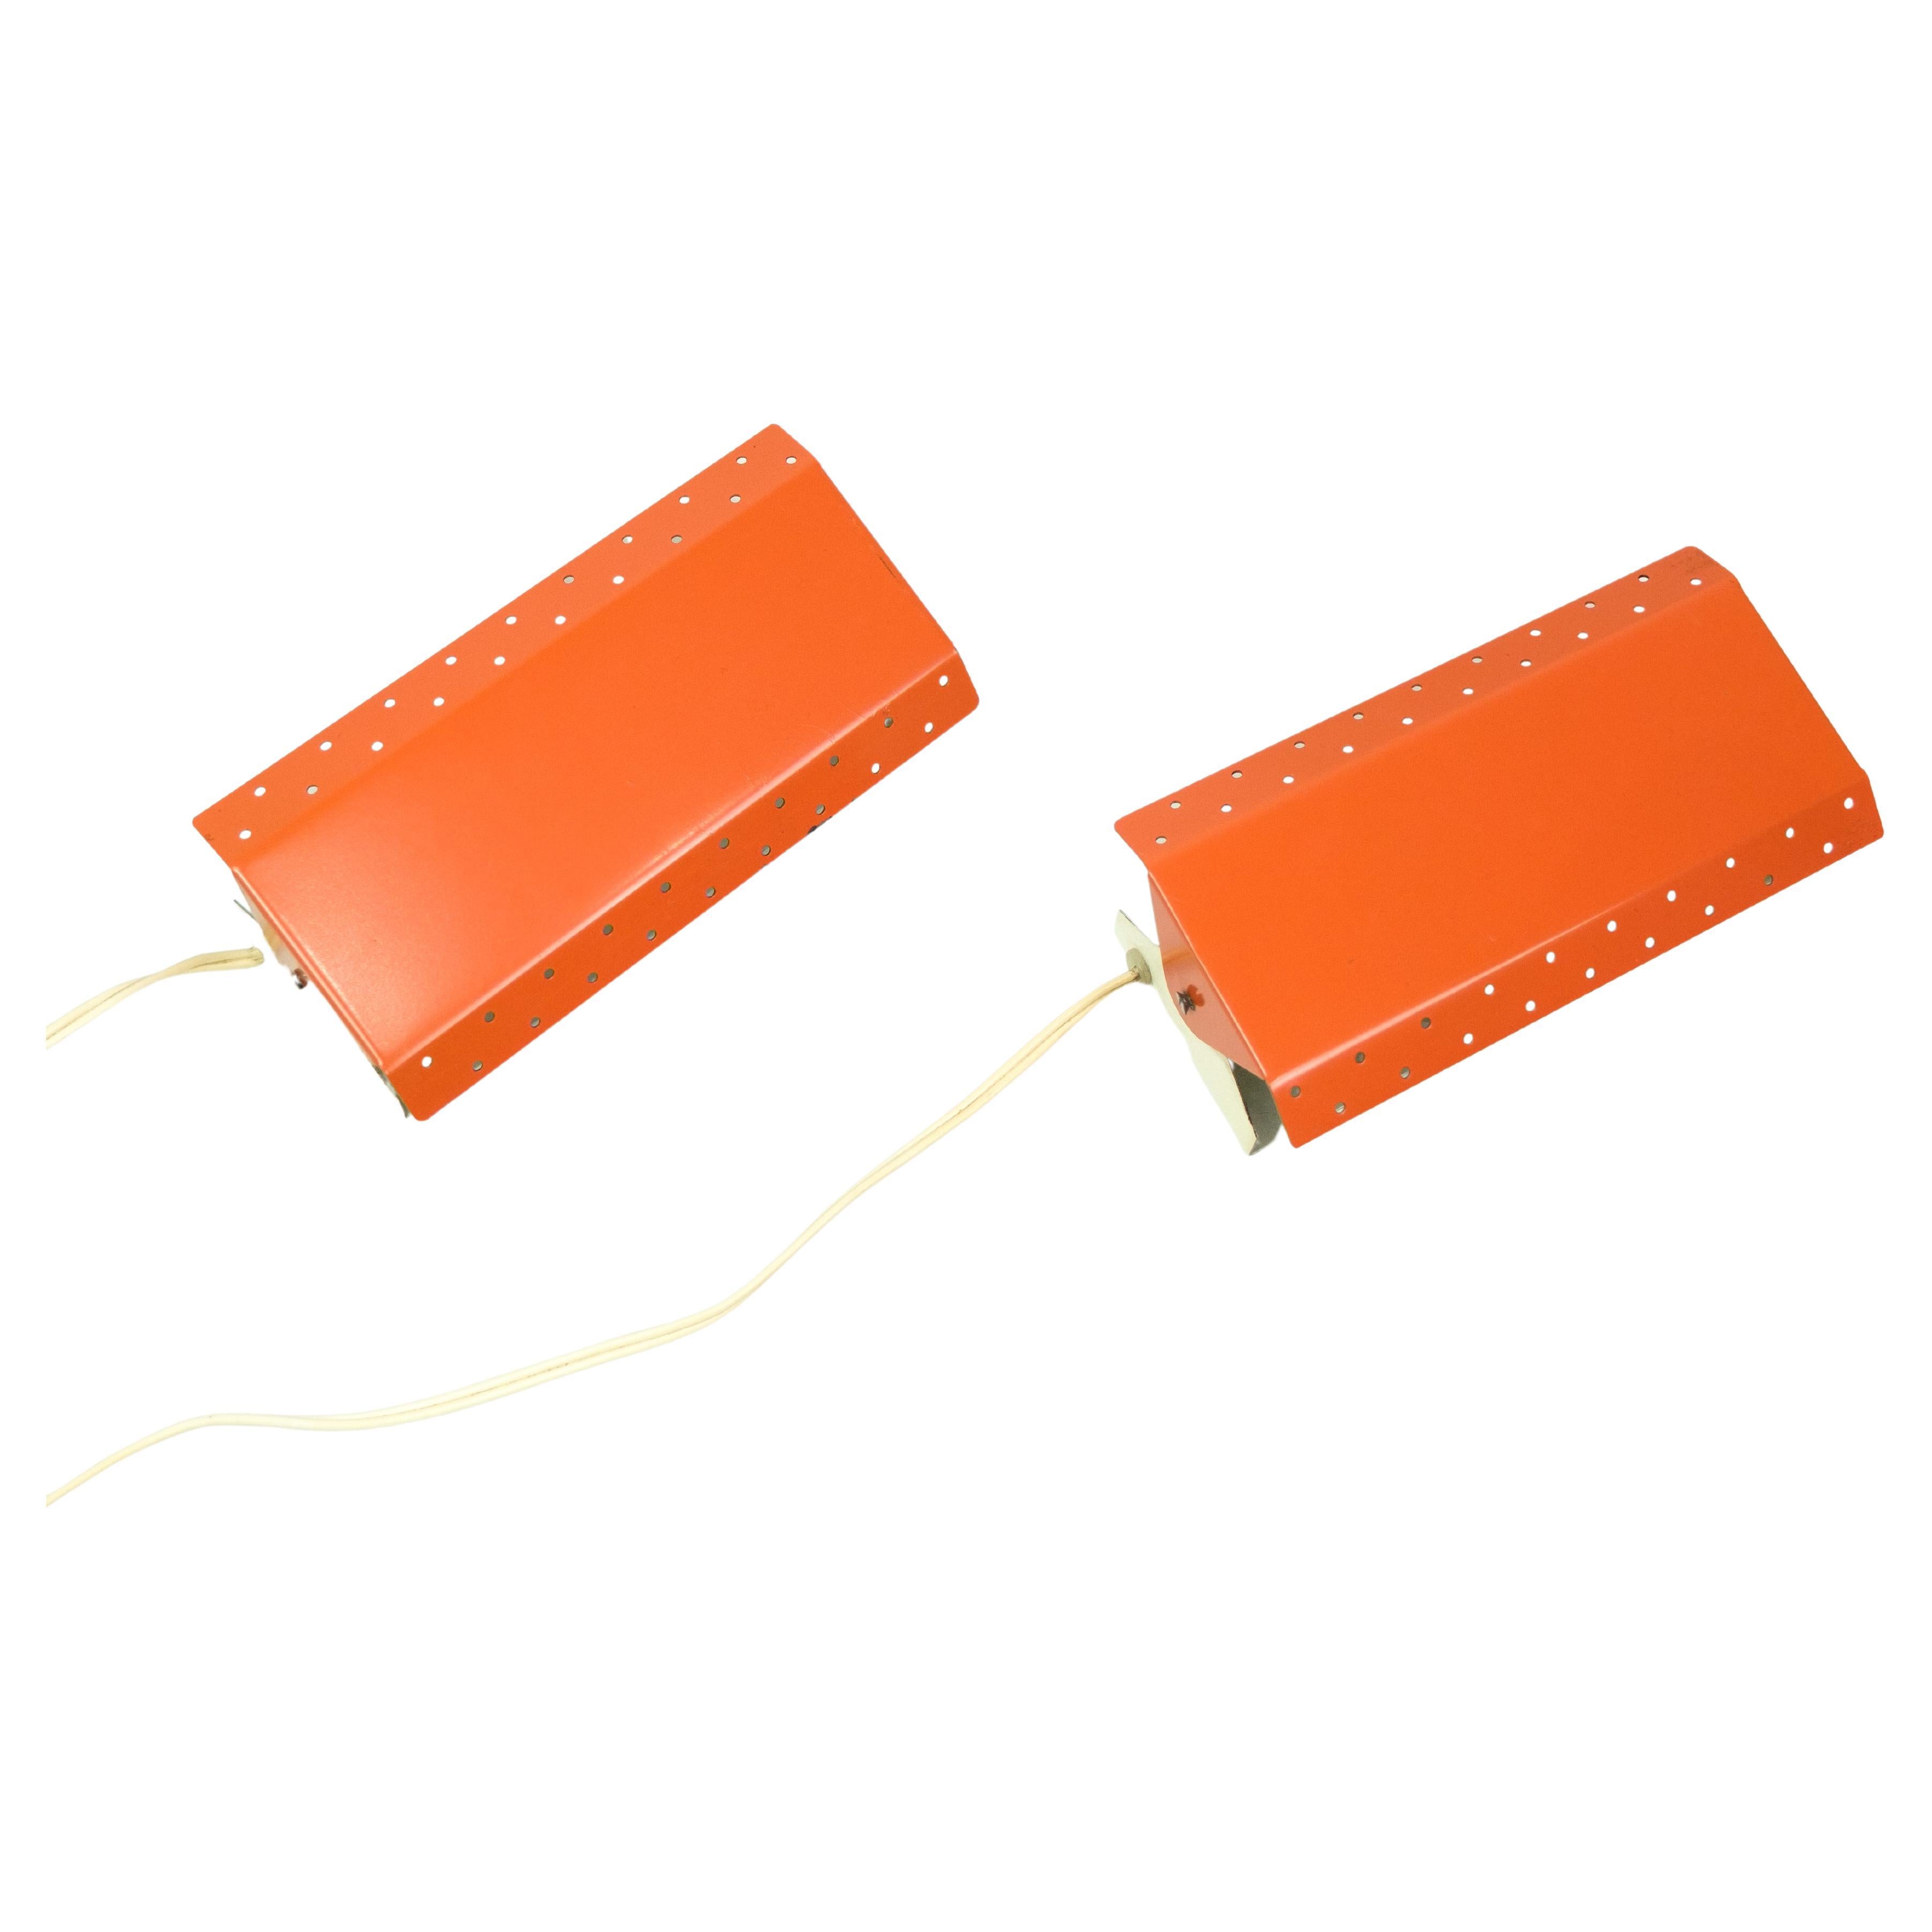 Set Of 2 Wall Lamps Painted Orange, Danish Design From 1970s